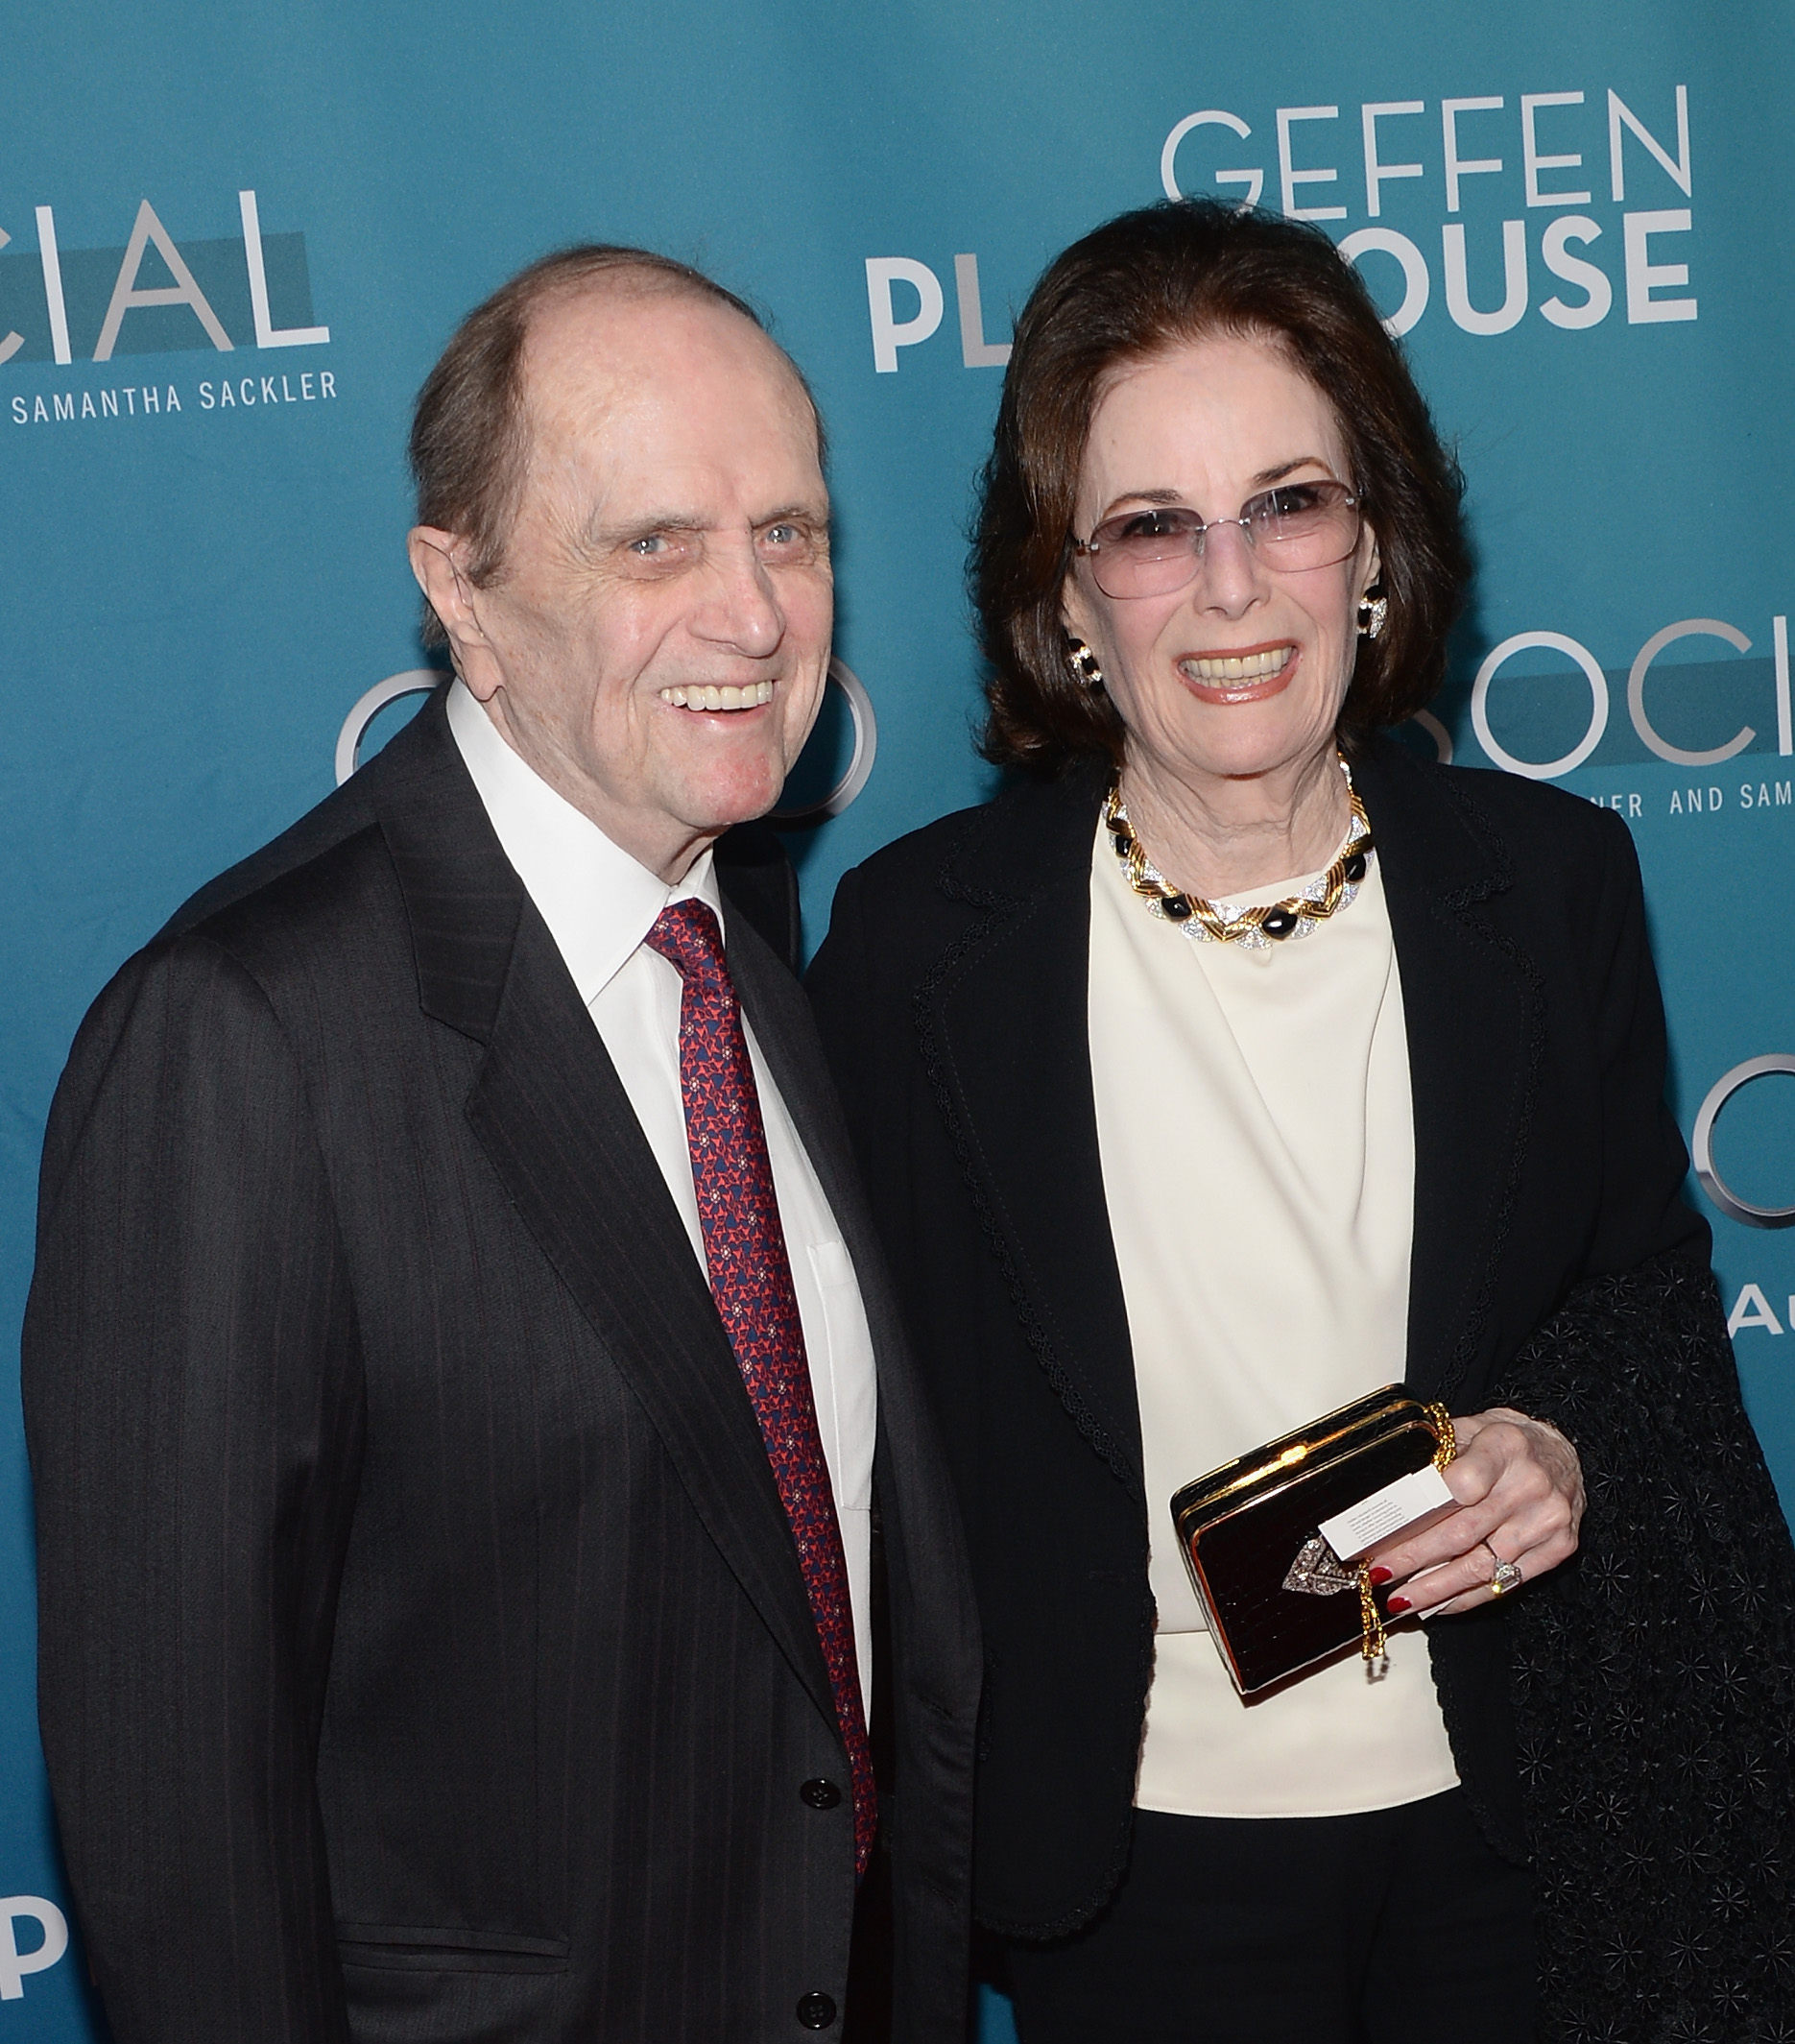 Bob Newhart and his wife Ginnie Newhart at the Geffen Playhouse’s Annual Backstage At The Geffen Gala on March 22, 2014, in Los Angeles, California